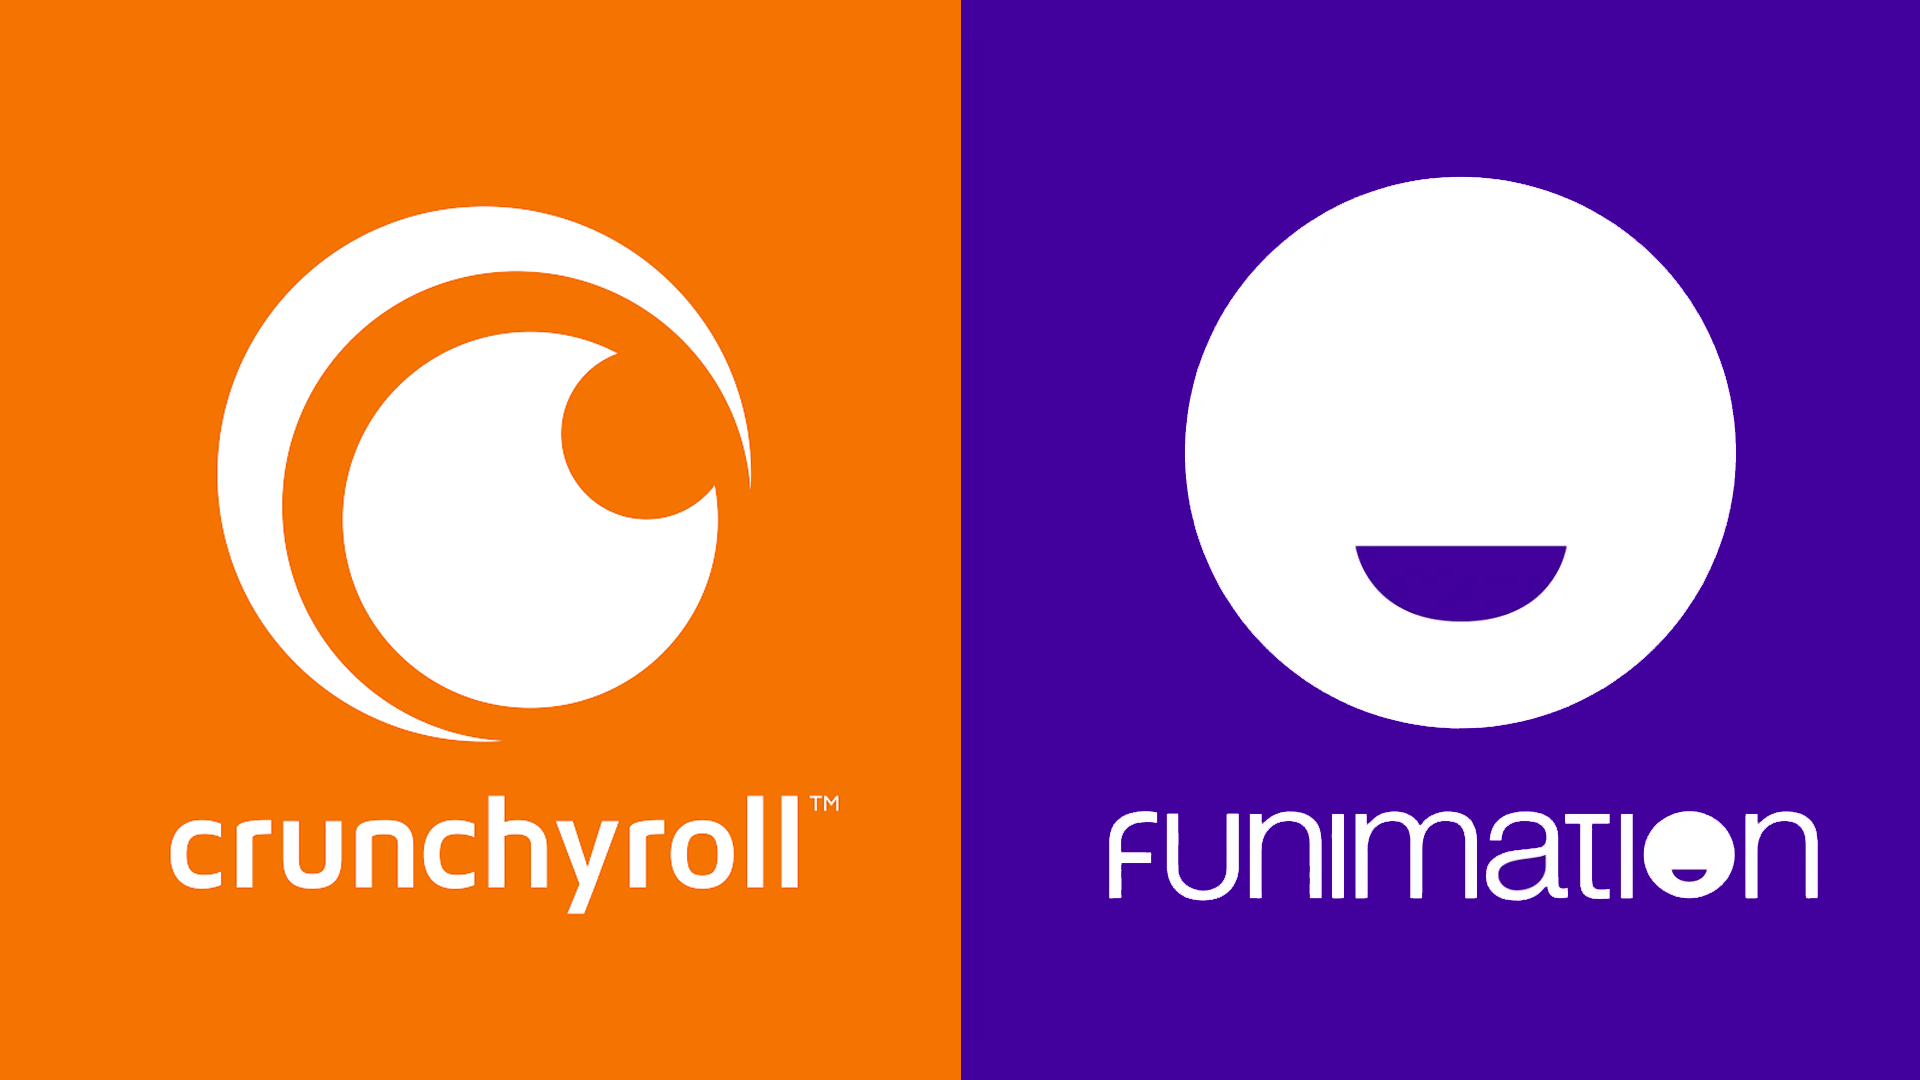 Funimation Content Moving to Crunchyroll for World's Largest Anime Library  - Crunchyroll News